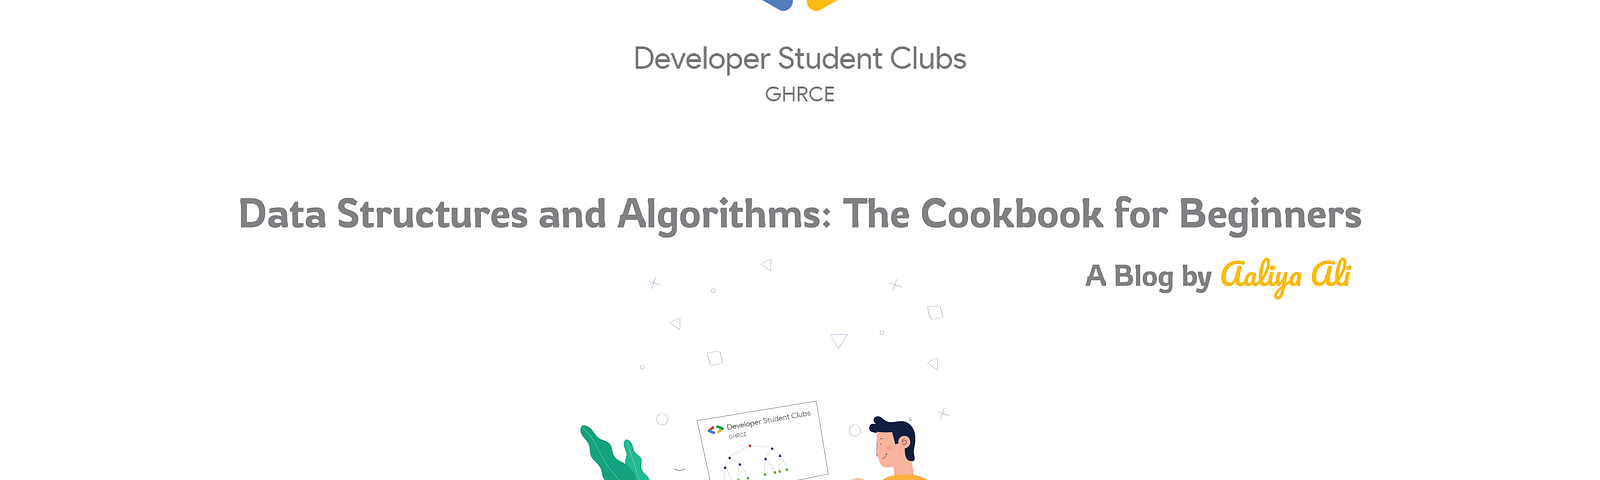 Data Structures and Algorithms: The Cookbook for Beginners